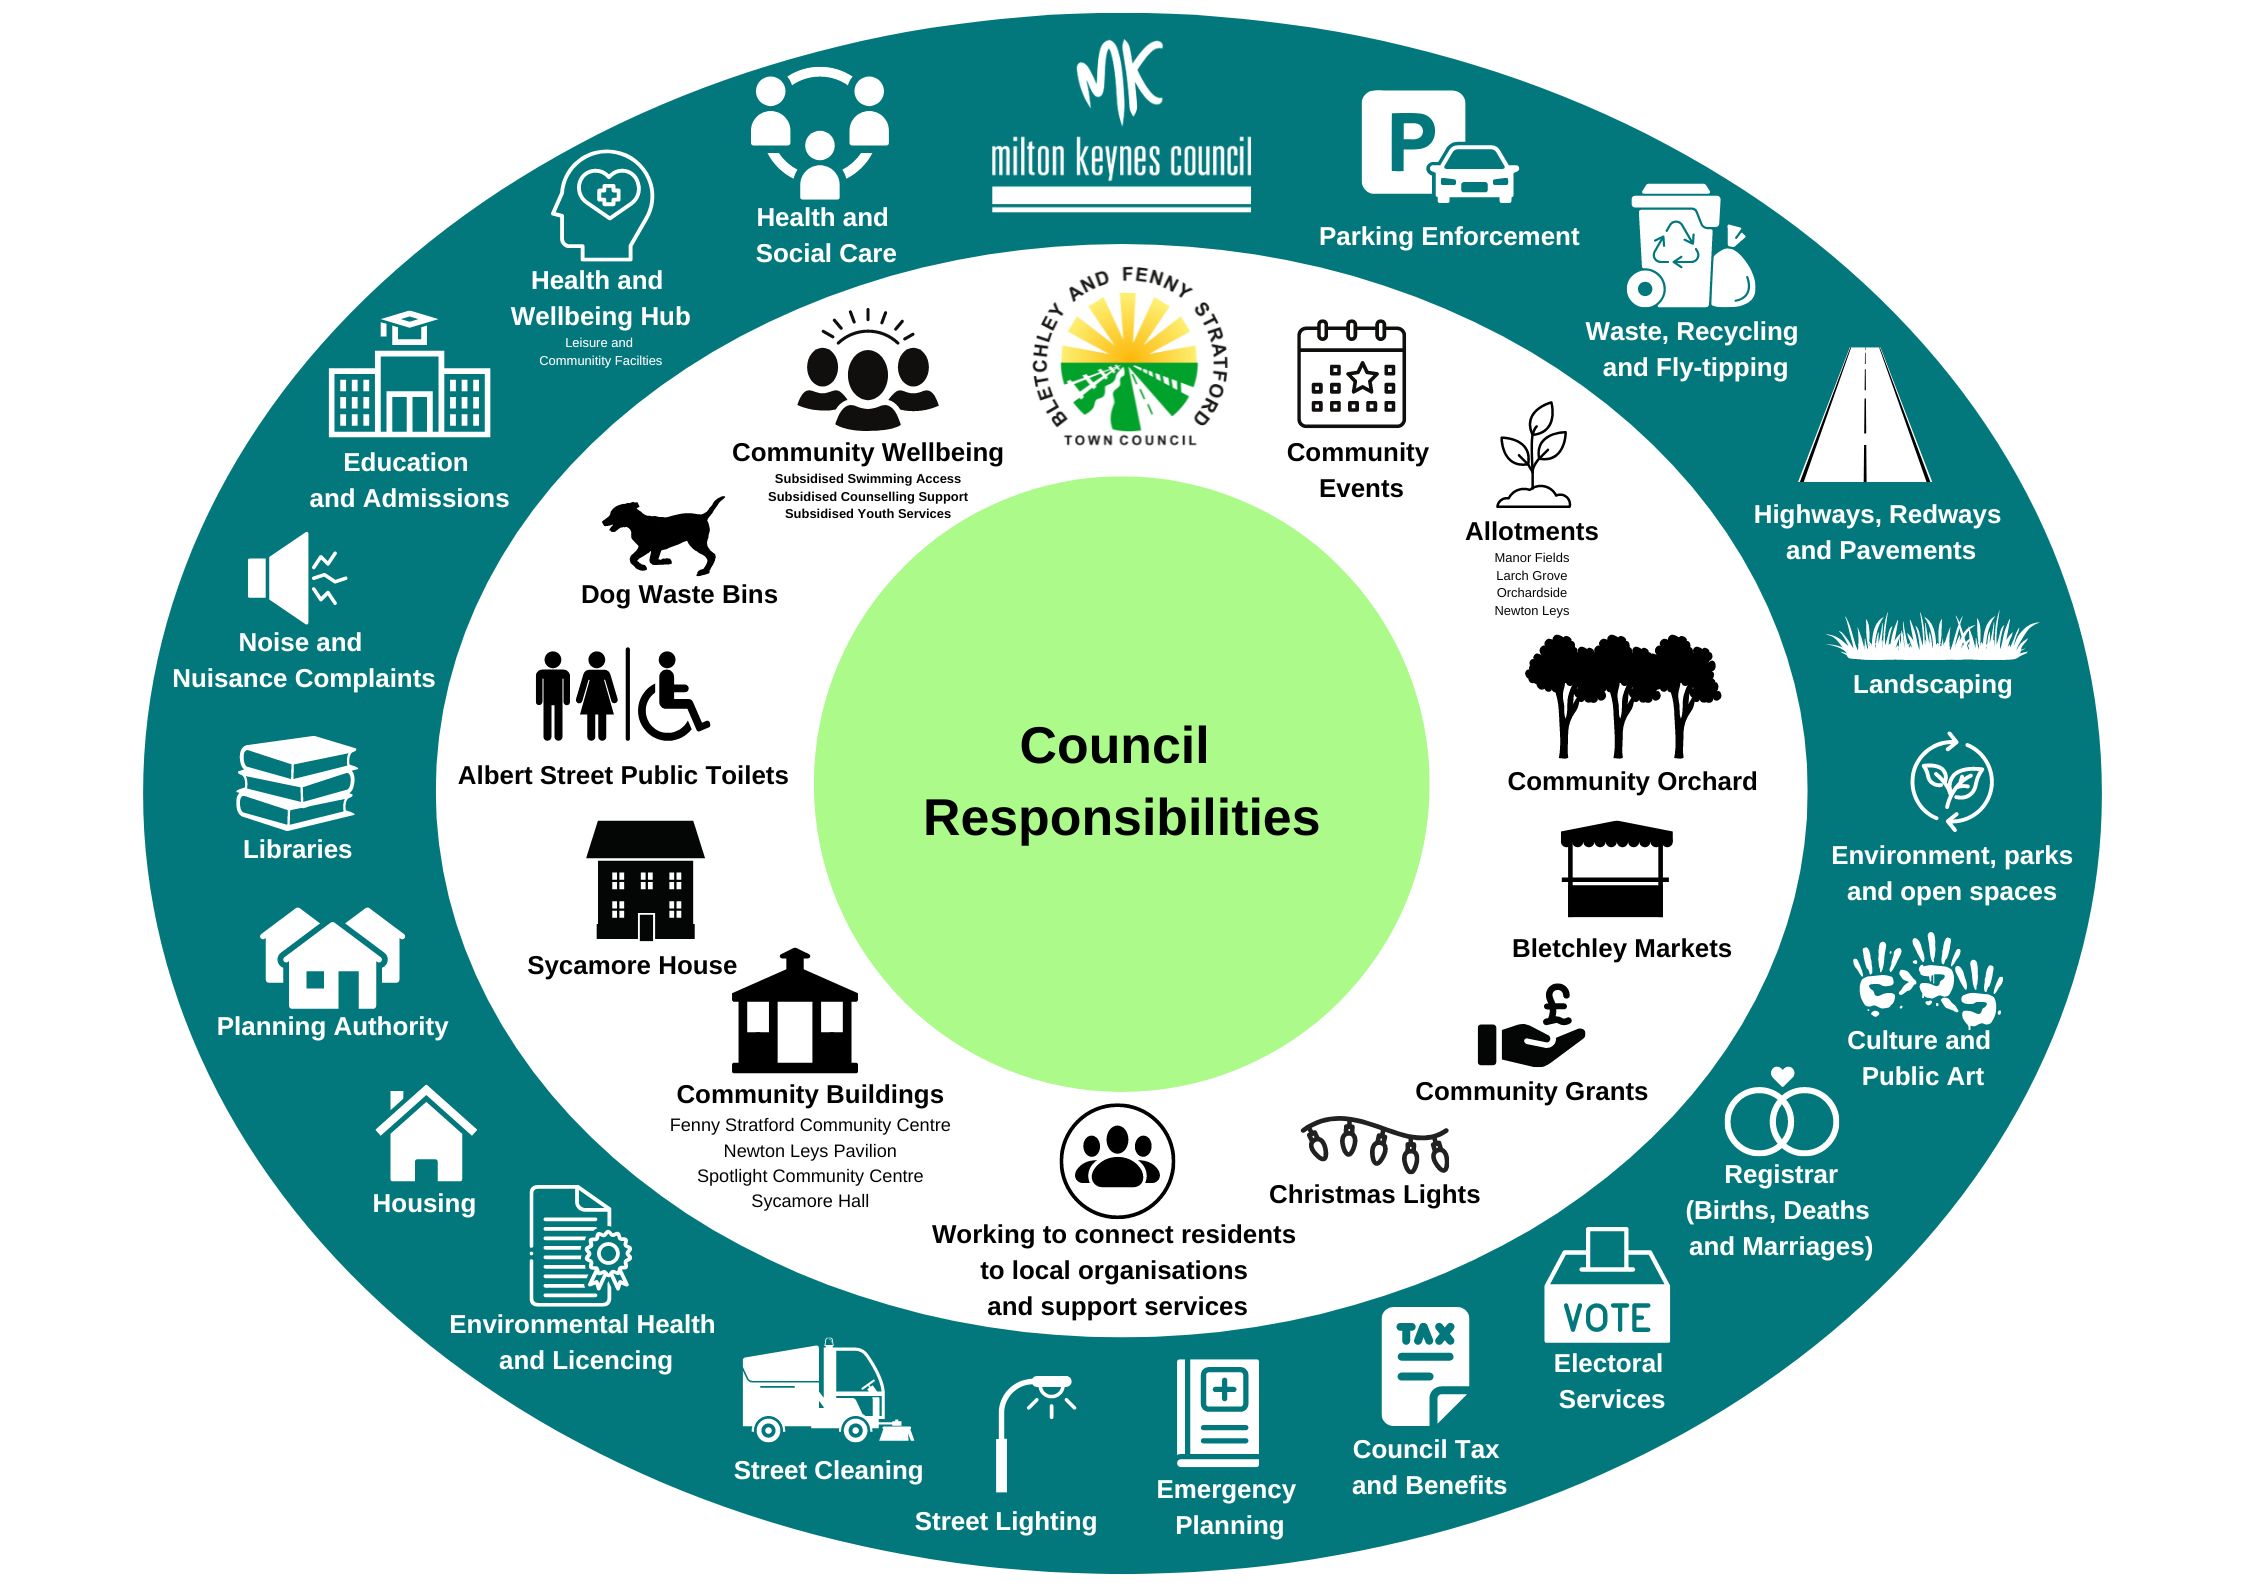 Image of town council's services and responsibilities